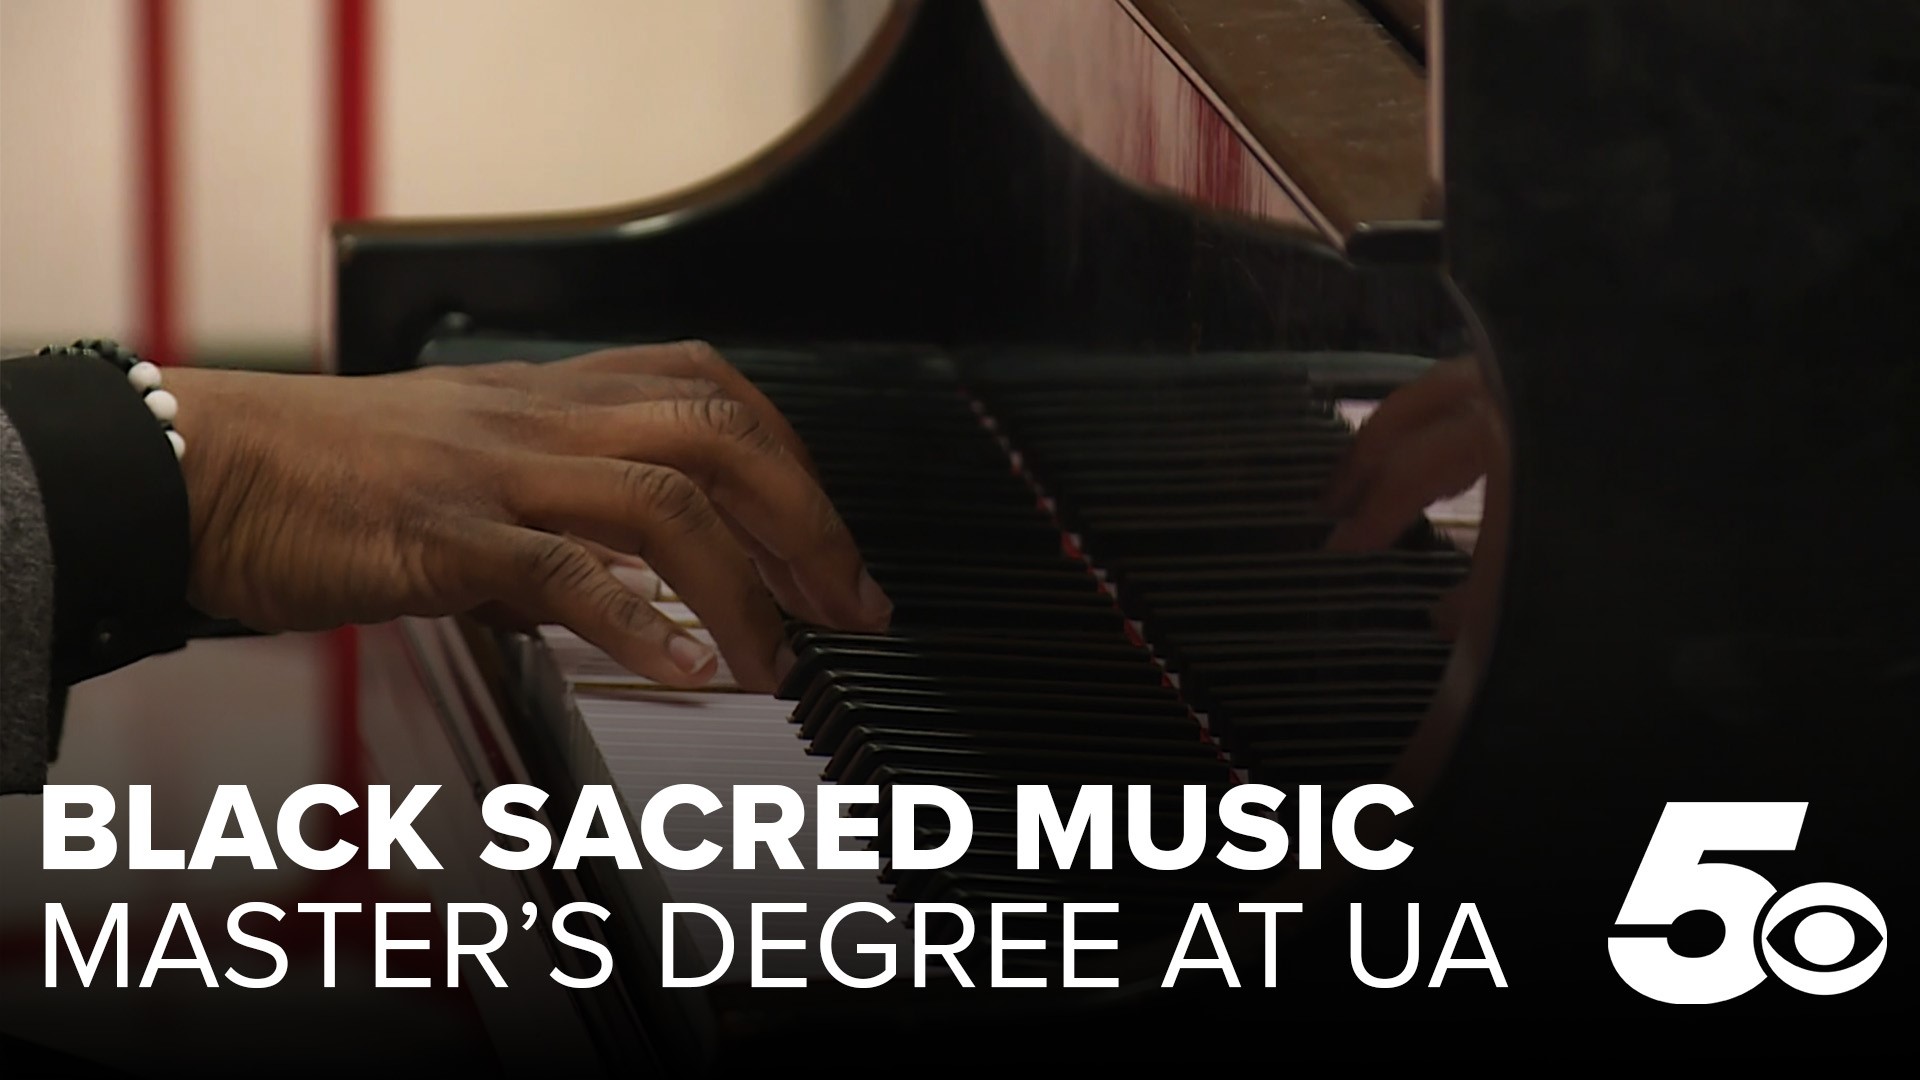 The Black Sacred Music Masters Degree program at U o fA has wrapped up its first summer semester.